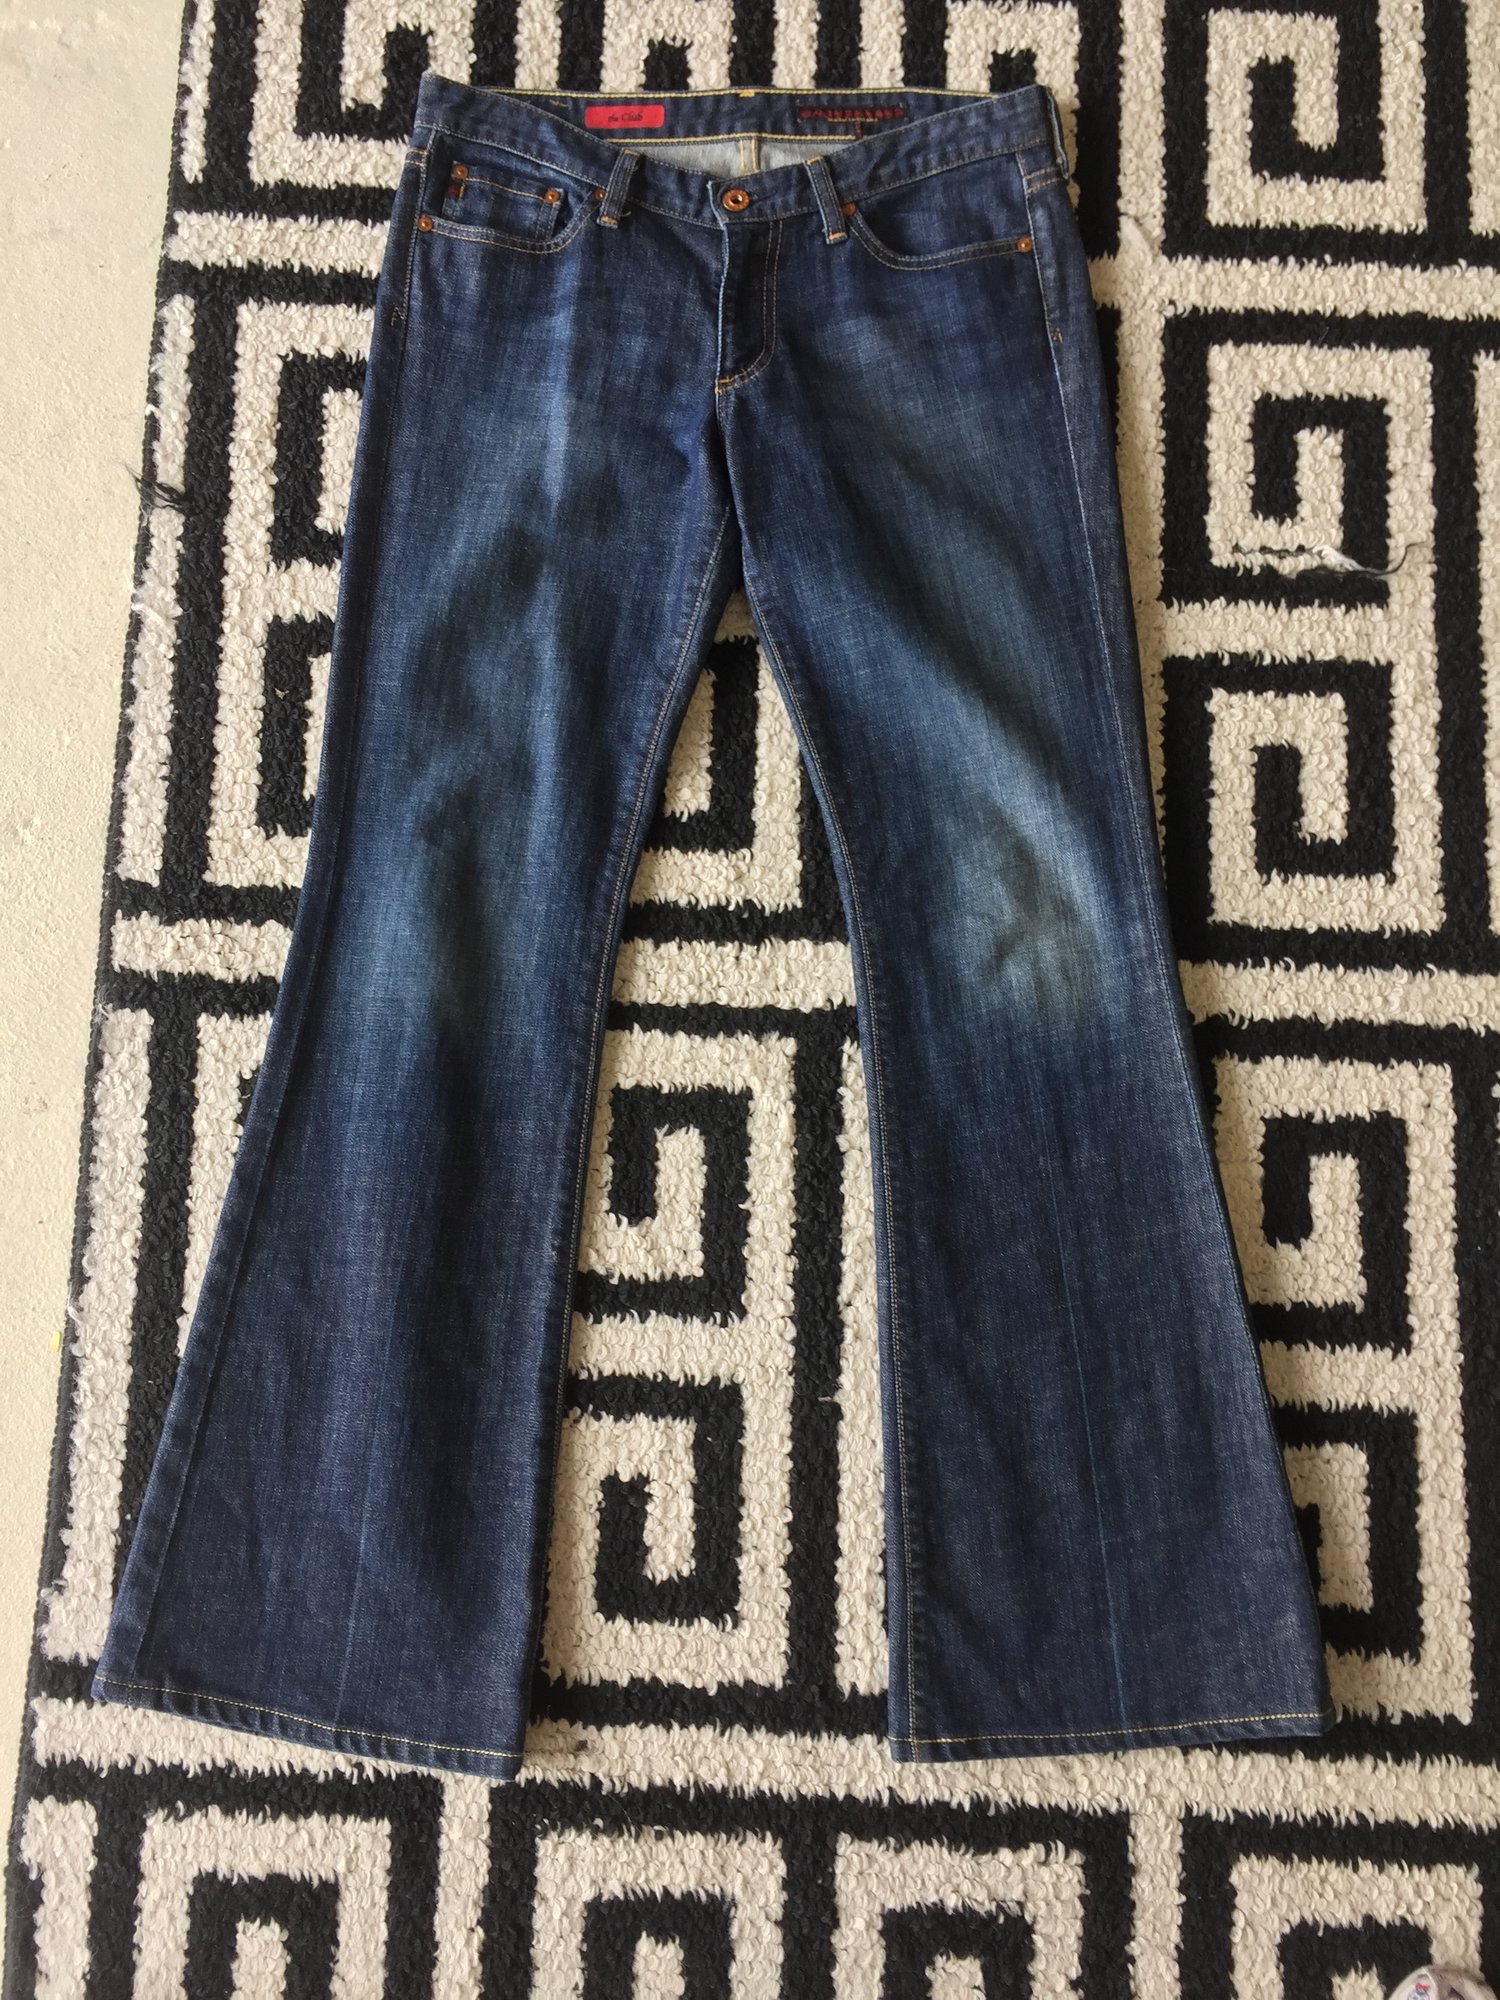 AG brand jeans. Size 29 (8). Flare cut. Gently used. Retail approx: $149